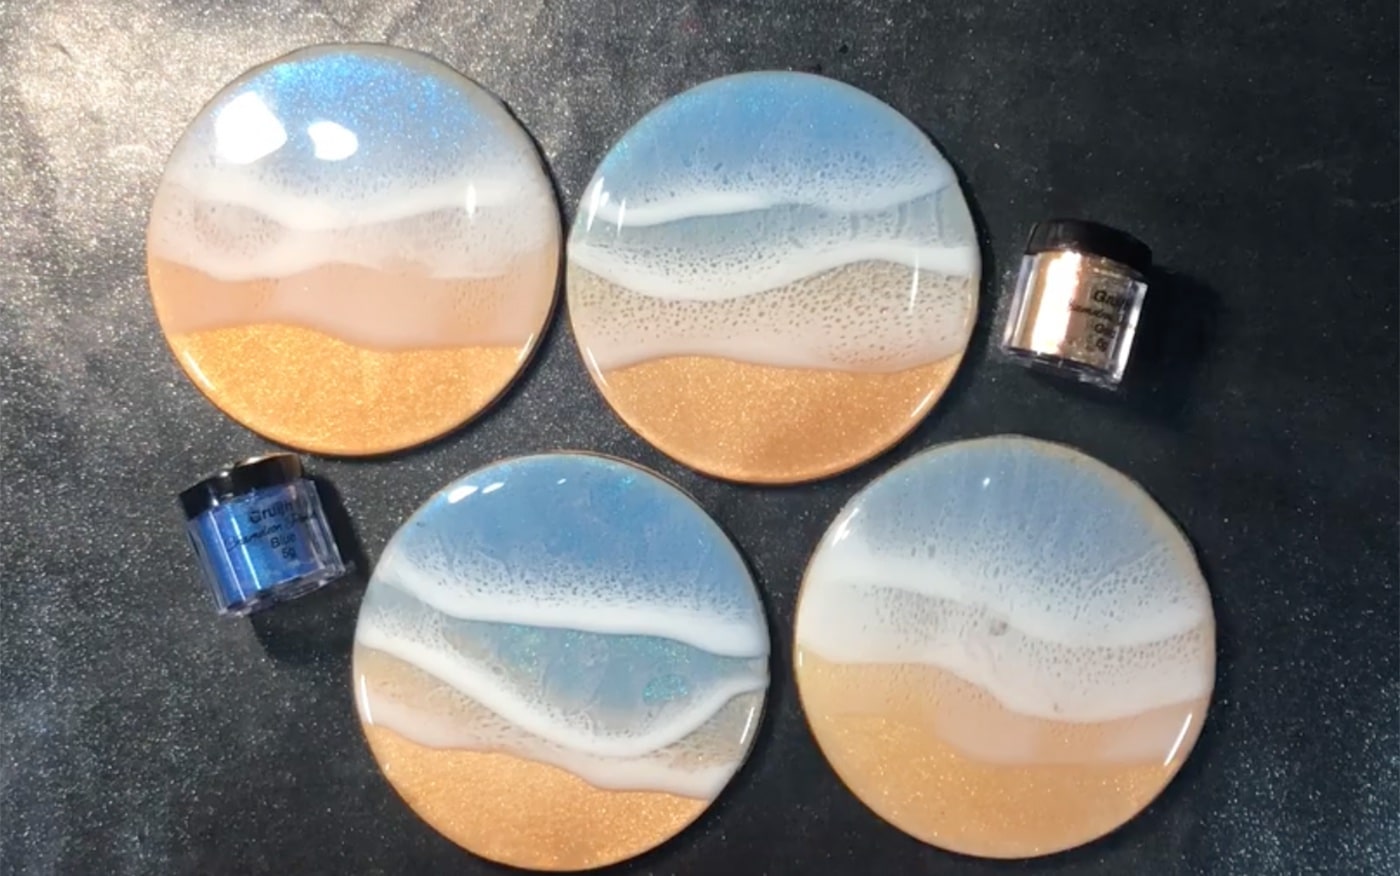 4 resin coasters that were painted to look like waves washing on a beach.